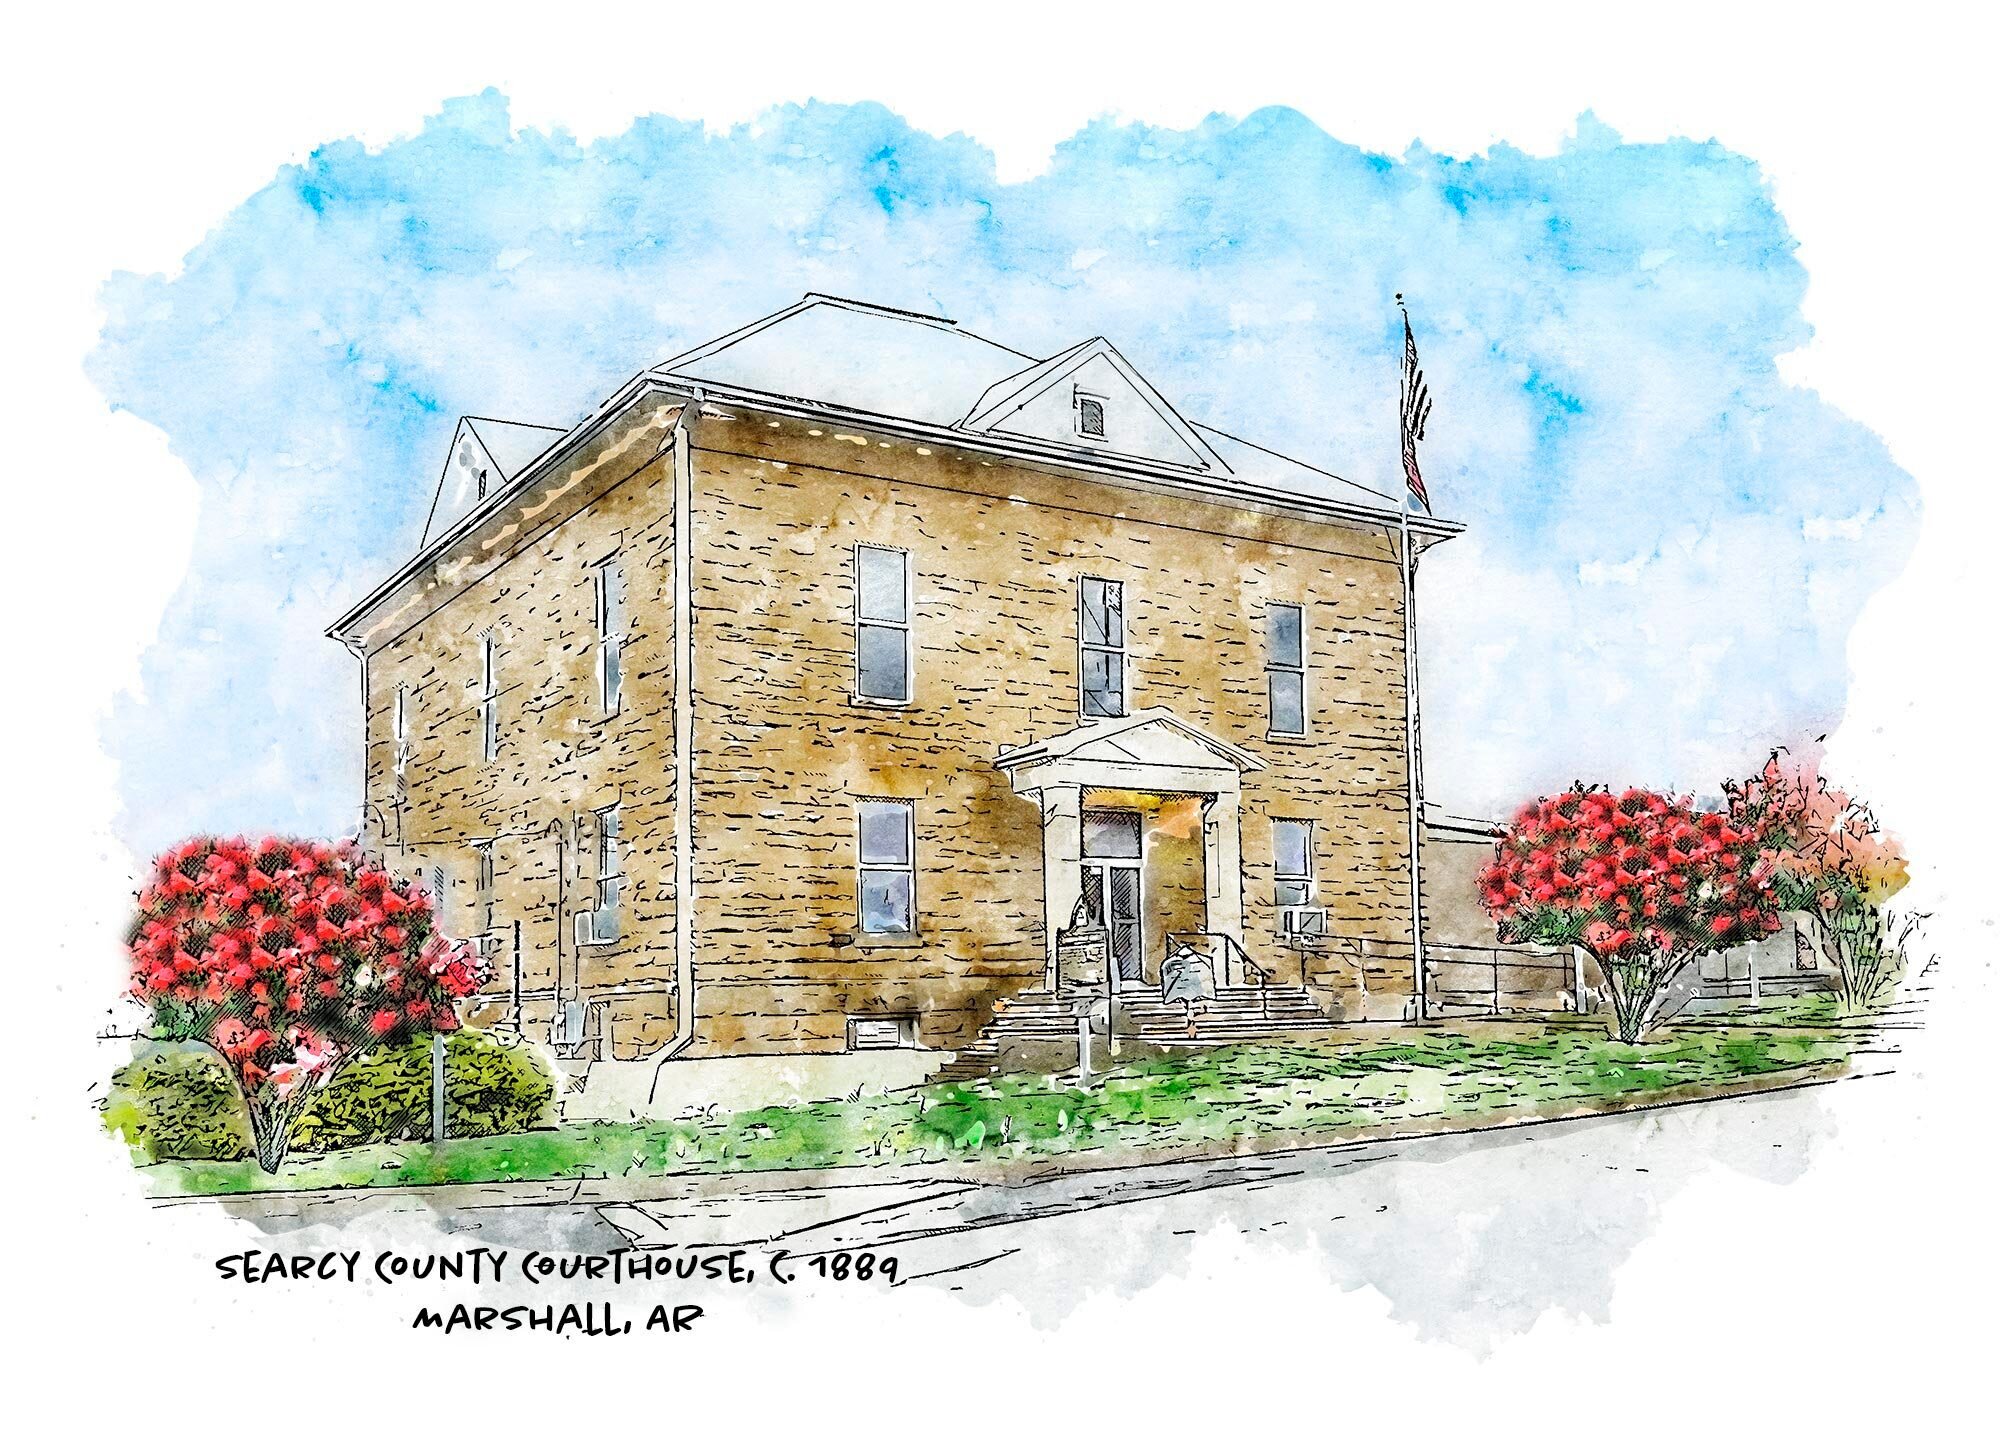 We Just added our 27th #historic #Arkansas #Courthouses, the Searcy County Courthouse in Marshall, Arkansas.  It was built in c. 1889 to replace an earlier courthouse that had burned down. Built of local stone, it has been in continuous use since it 